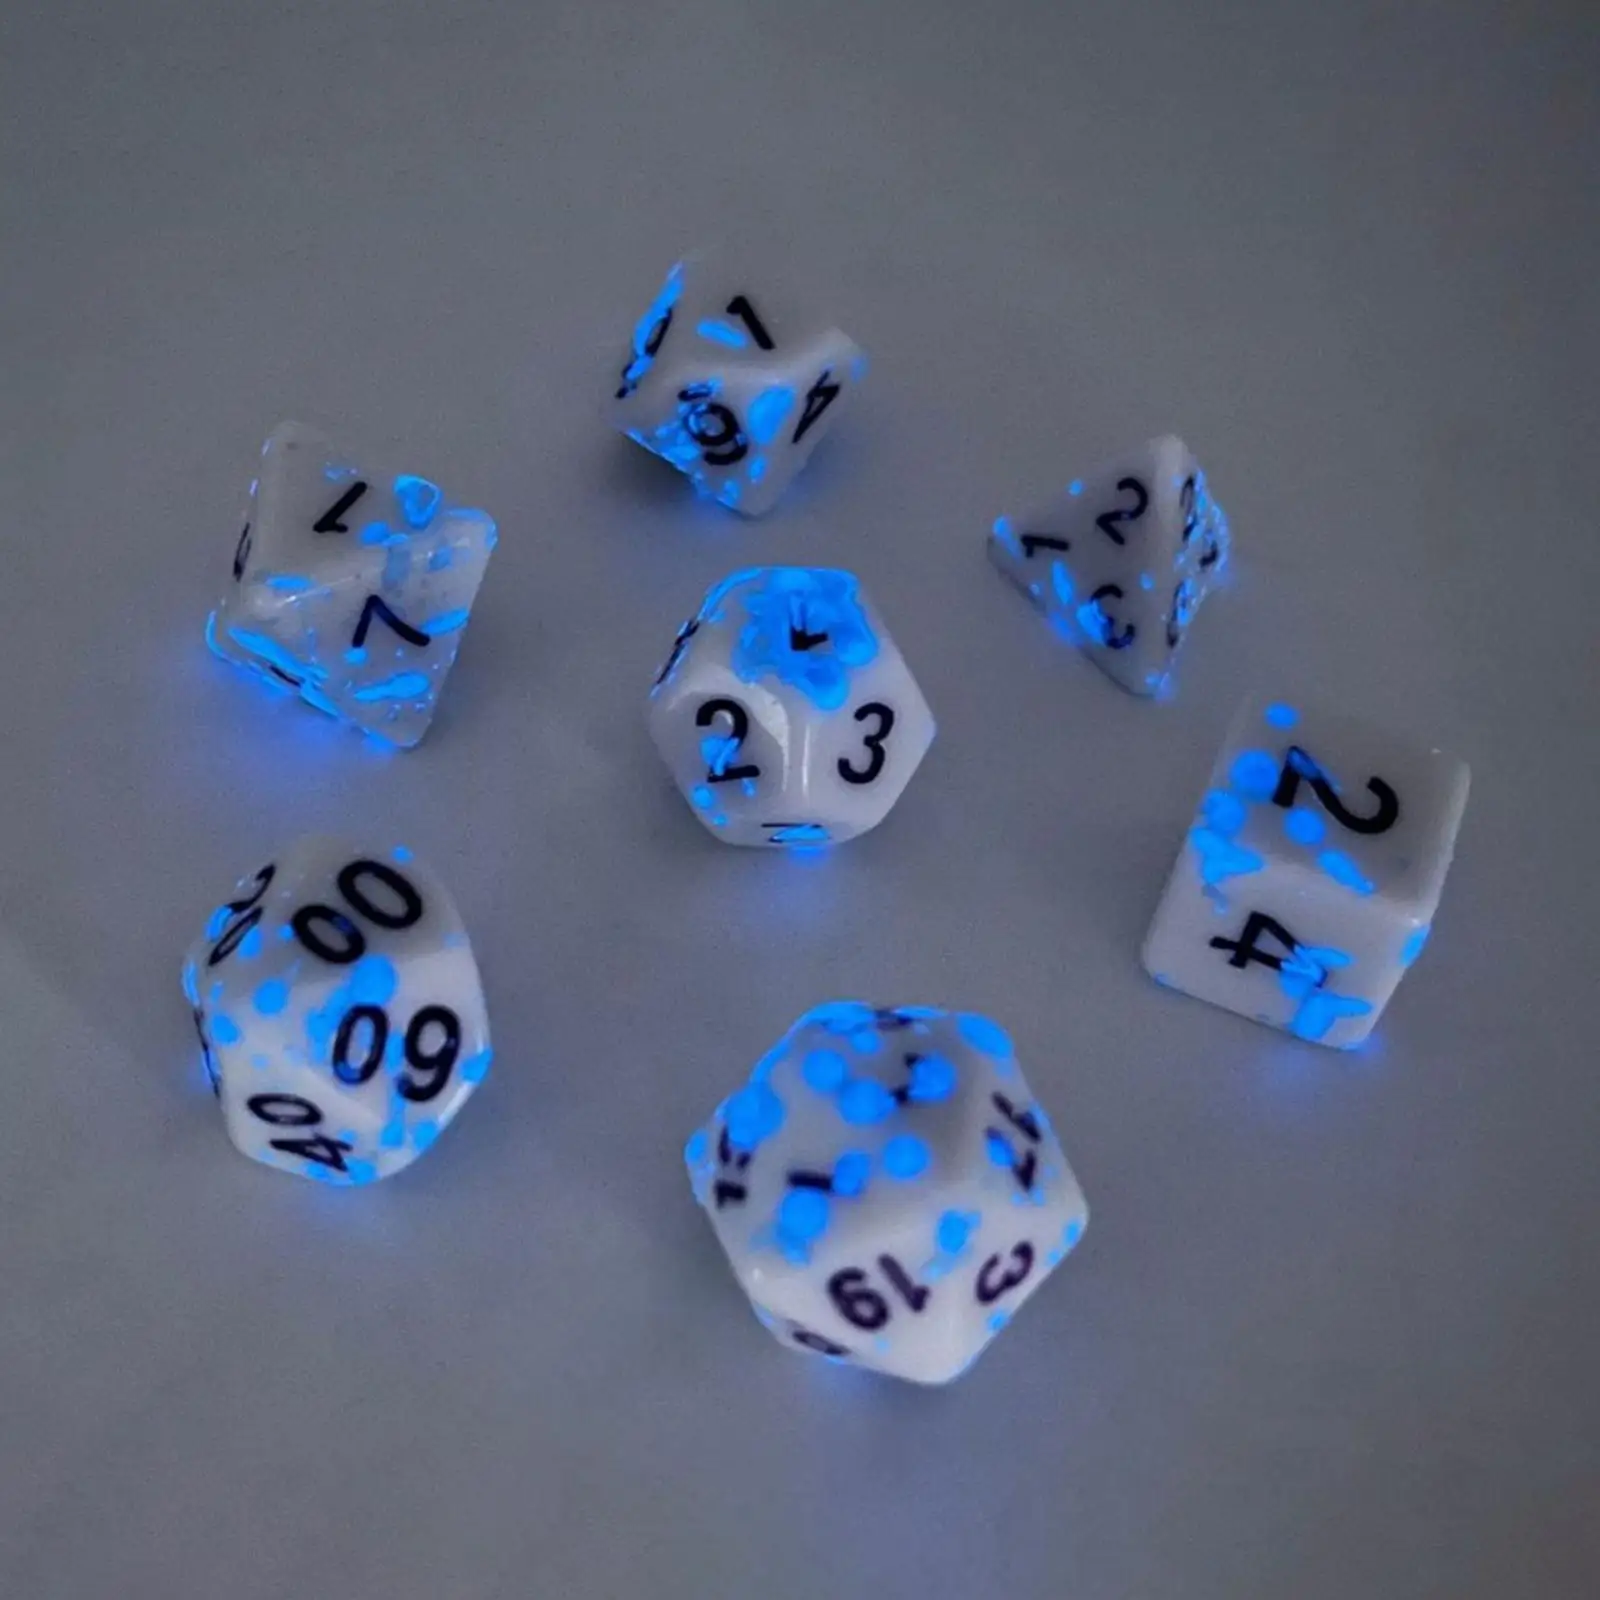 7Pieces Acrylic Polyhedral Dice Set D4 D6 D8 D10 D12 D20 Multisided Dice Color Changing Dice for Table Board Game Card Games